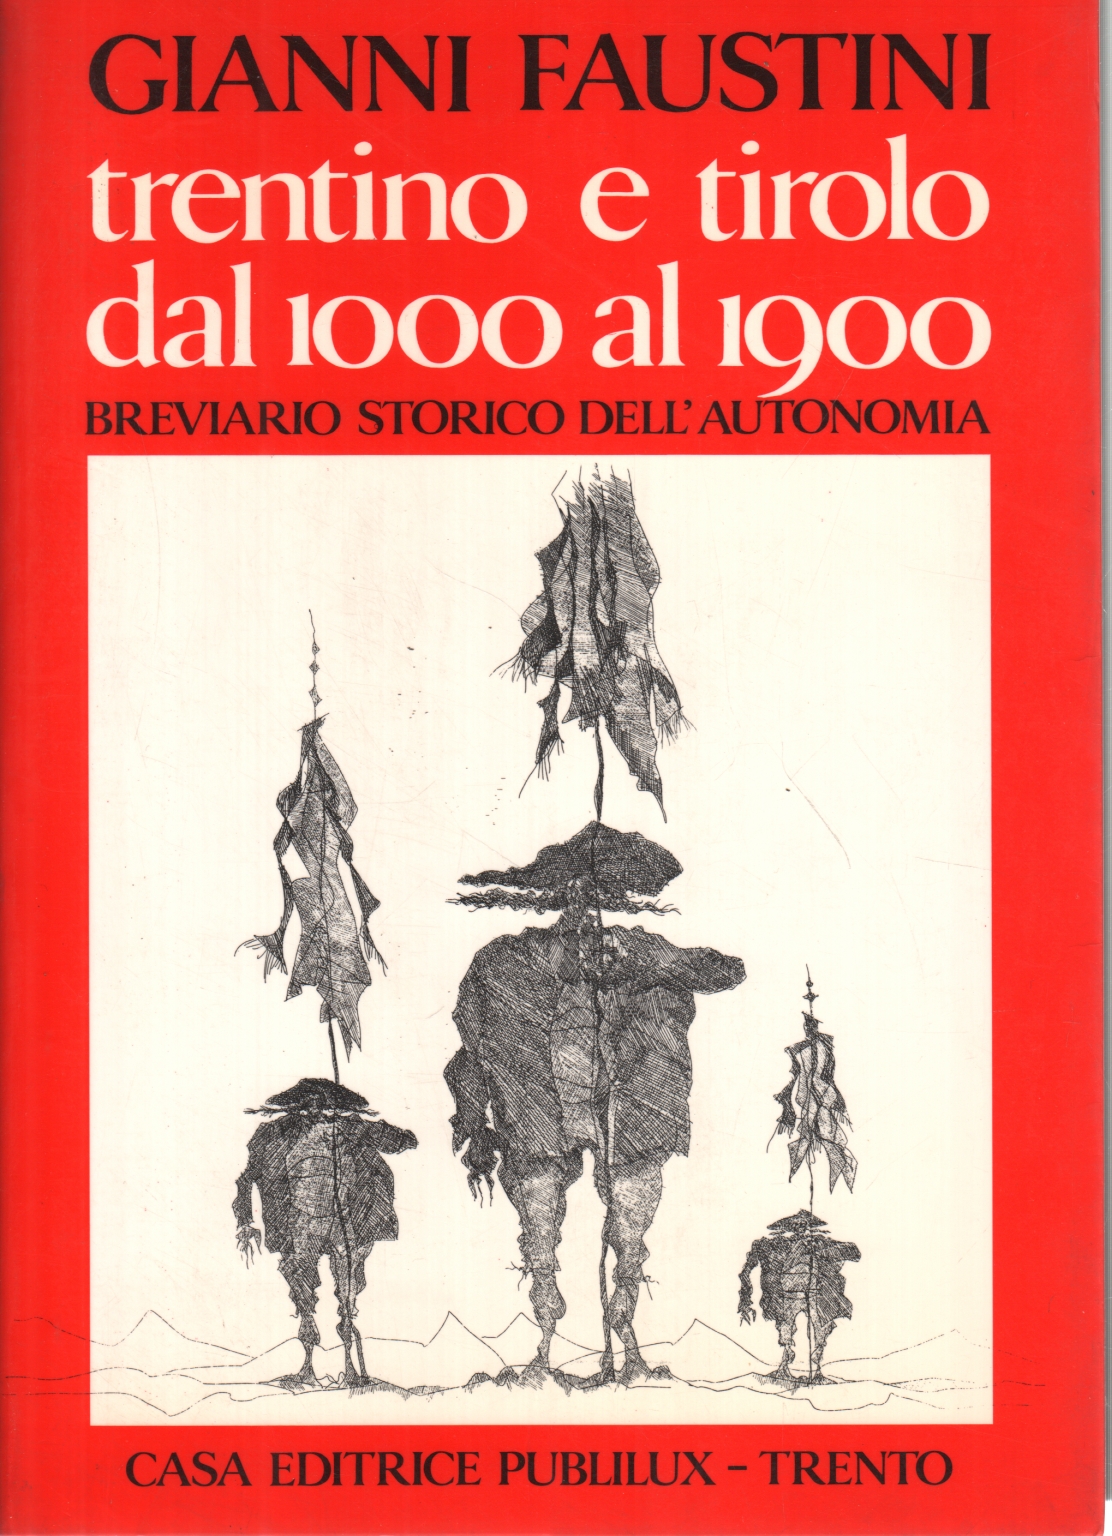 The Trentino and the Tyrol, from 1000 to 1900, Gianni Faustini